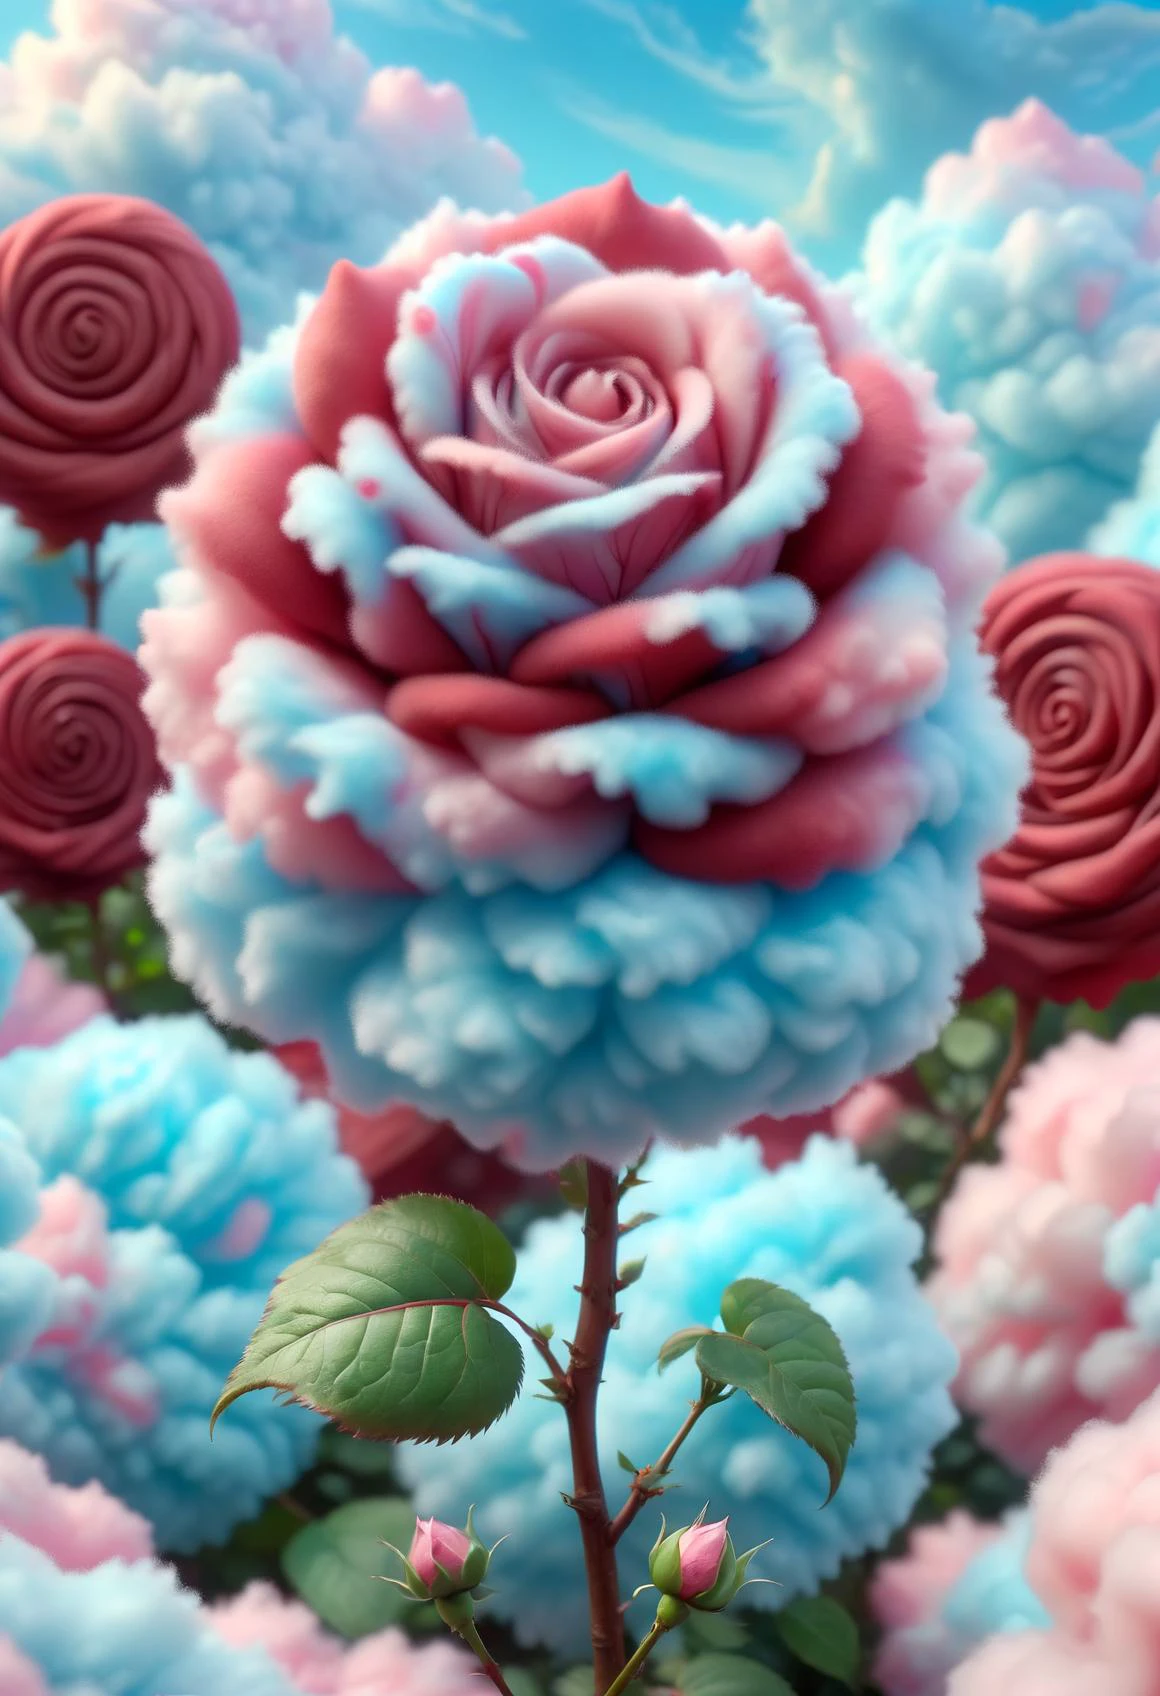 cottoncandy rose bush, extremely detailed, macro photo, fluffy petals, dark red swirled with light blue, high quality, beautiful, elegant, cinematic